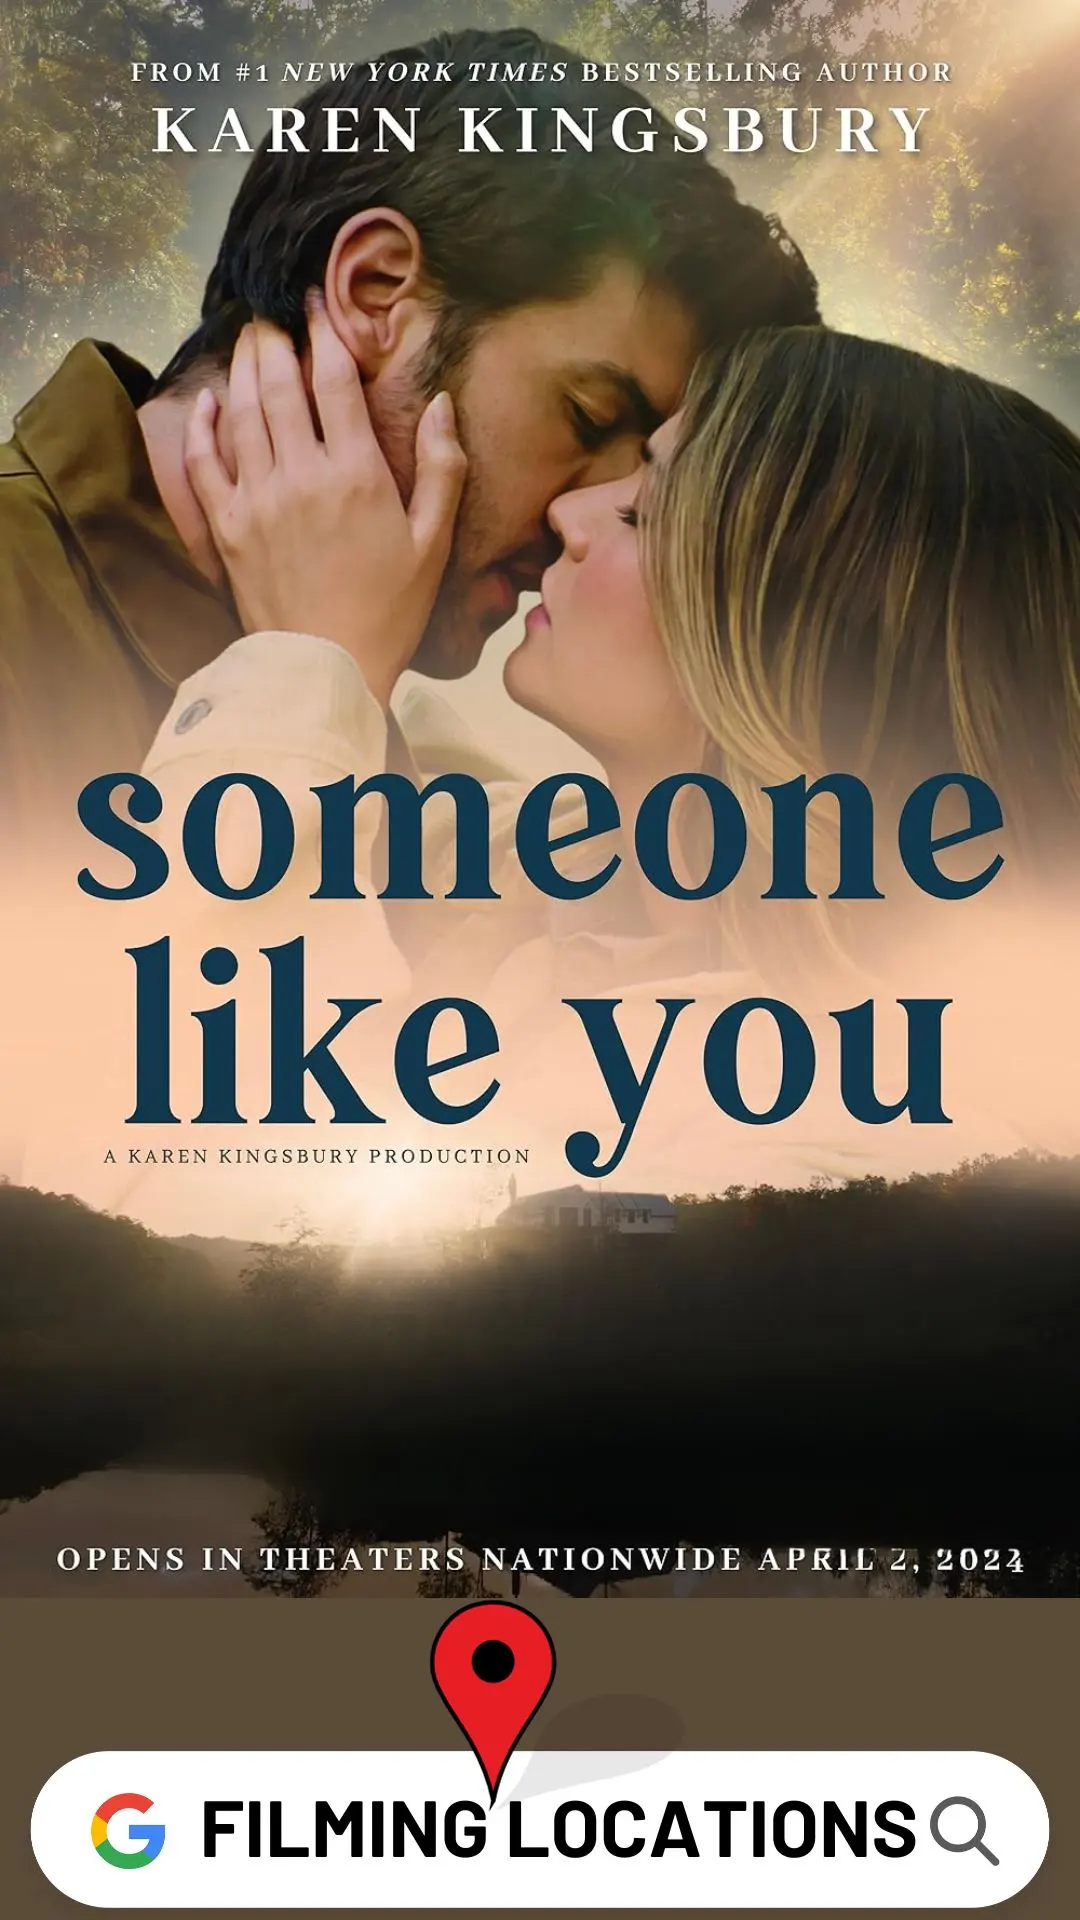 Someone Like You Filming Locations